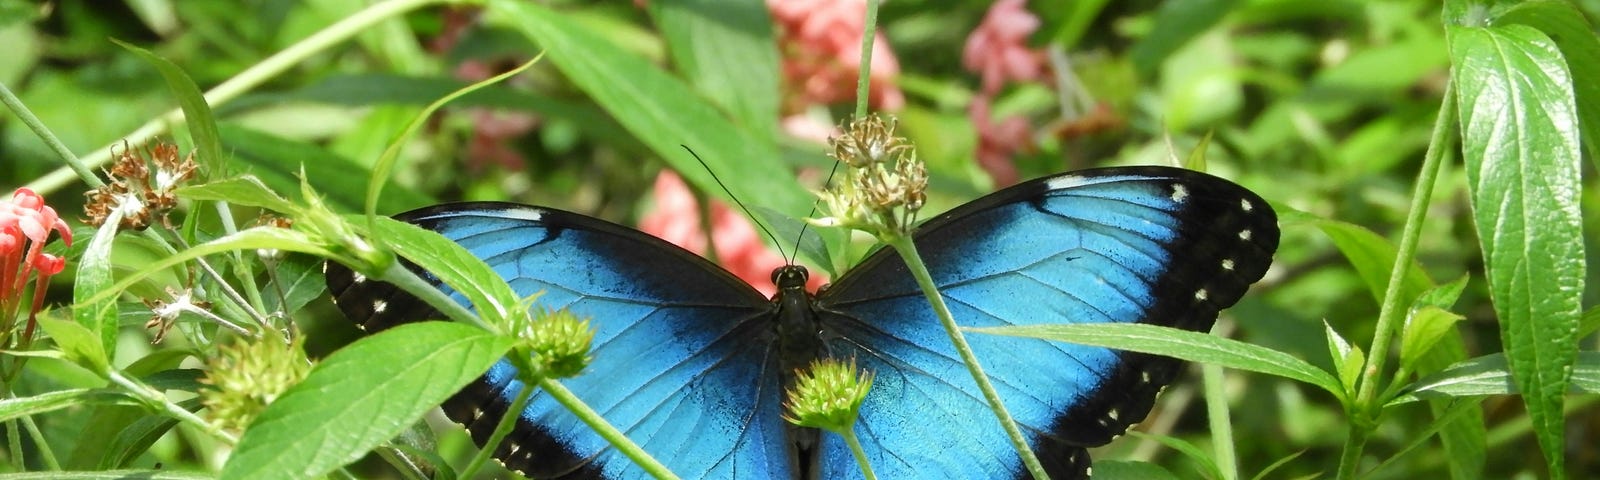 A butterfly with blue wings outlined in black sits upon a bed of green leaves. this is a symbol of peace and happiness to me, which is what I want.